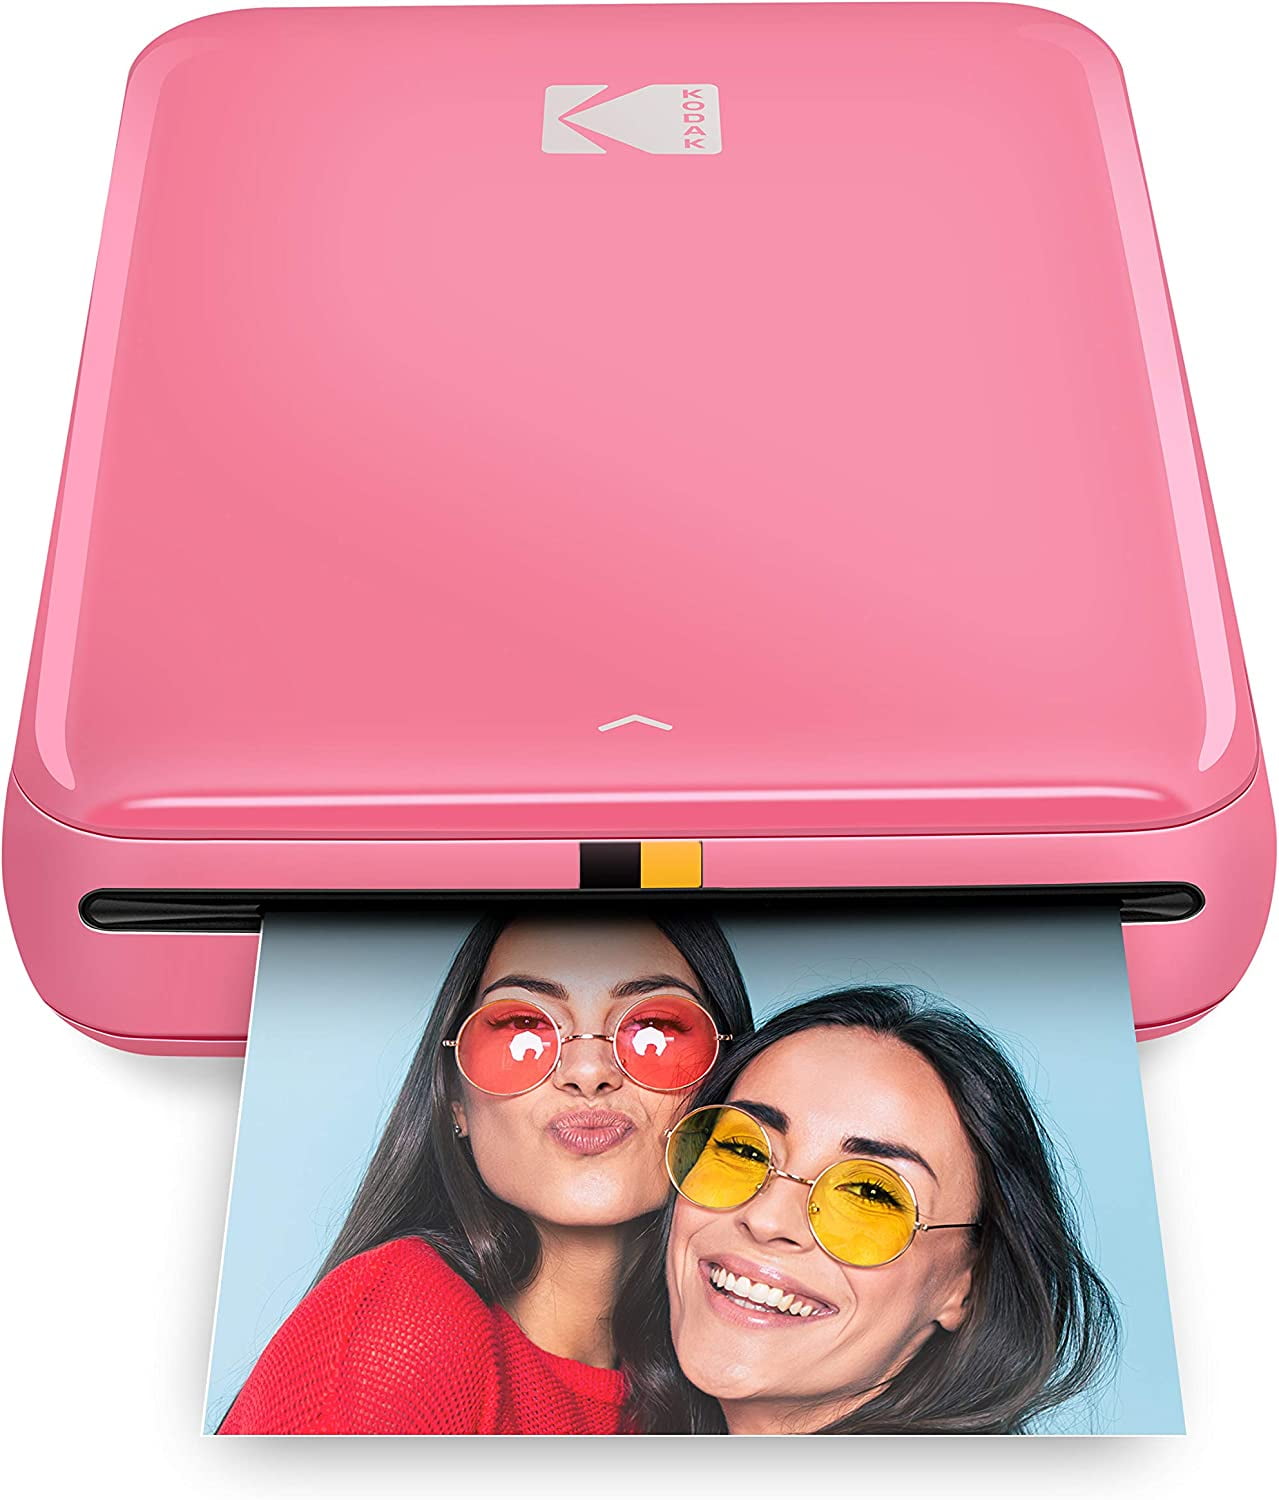 Kodak Step Wireless Photo Printer (Pink) Compatible with iOS & Android Devices